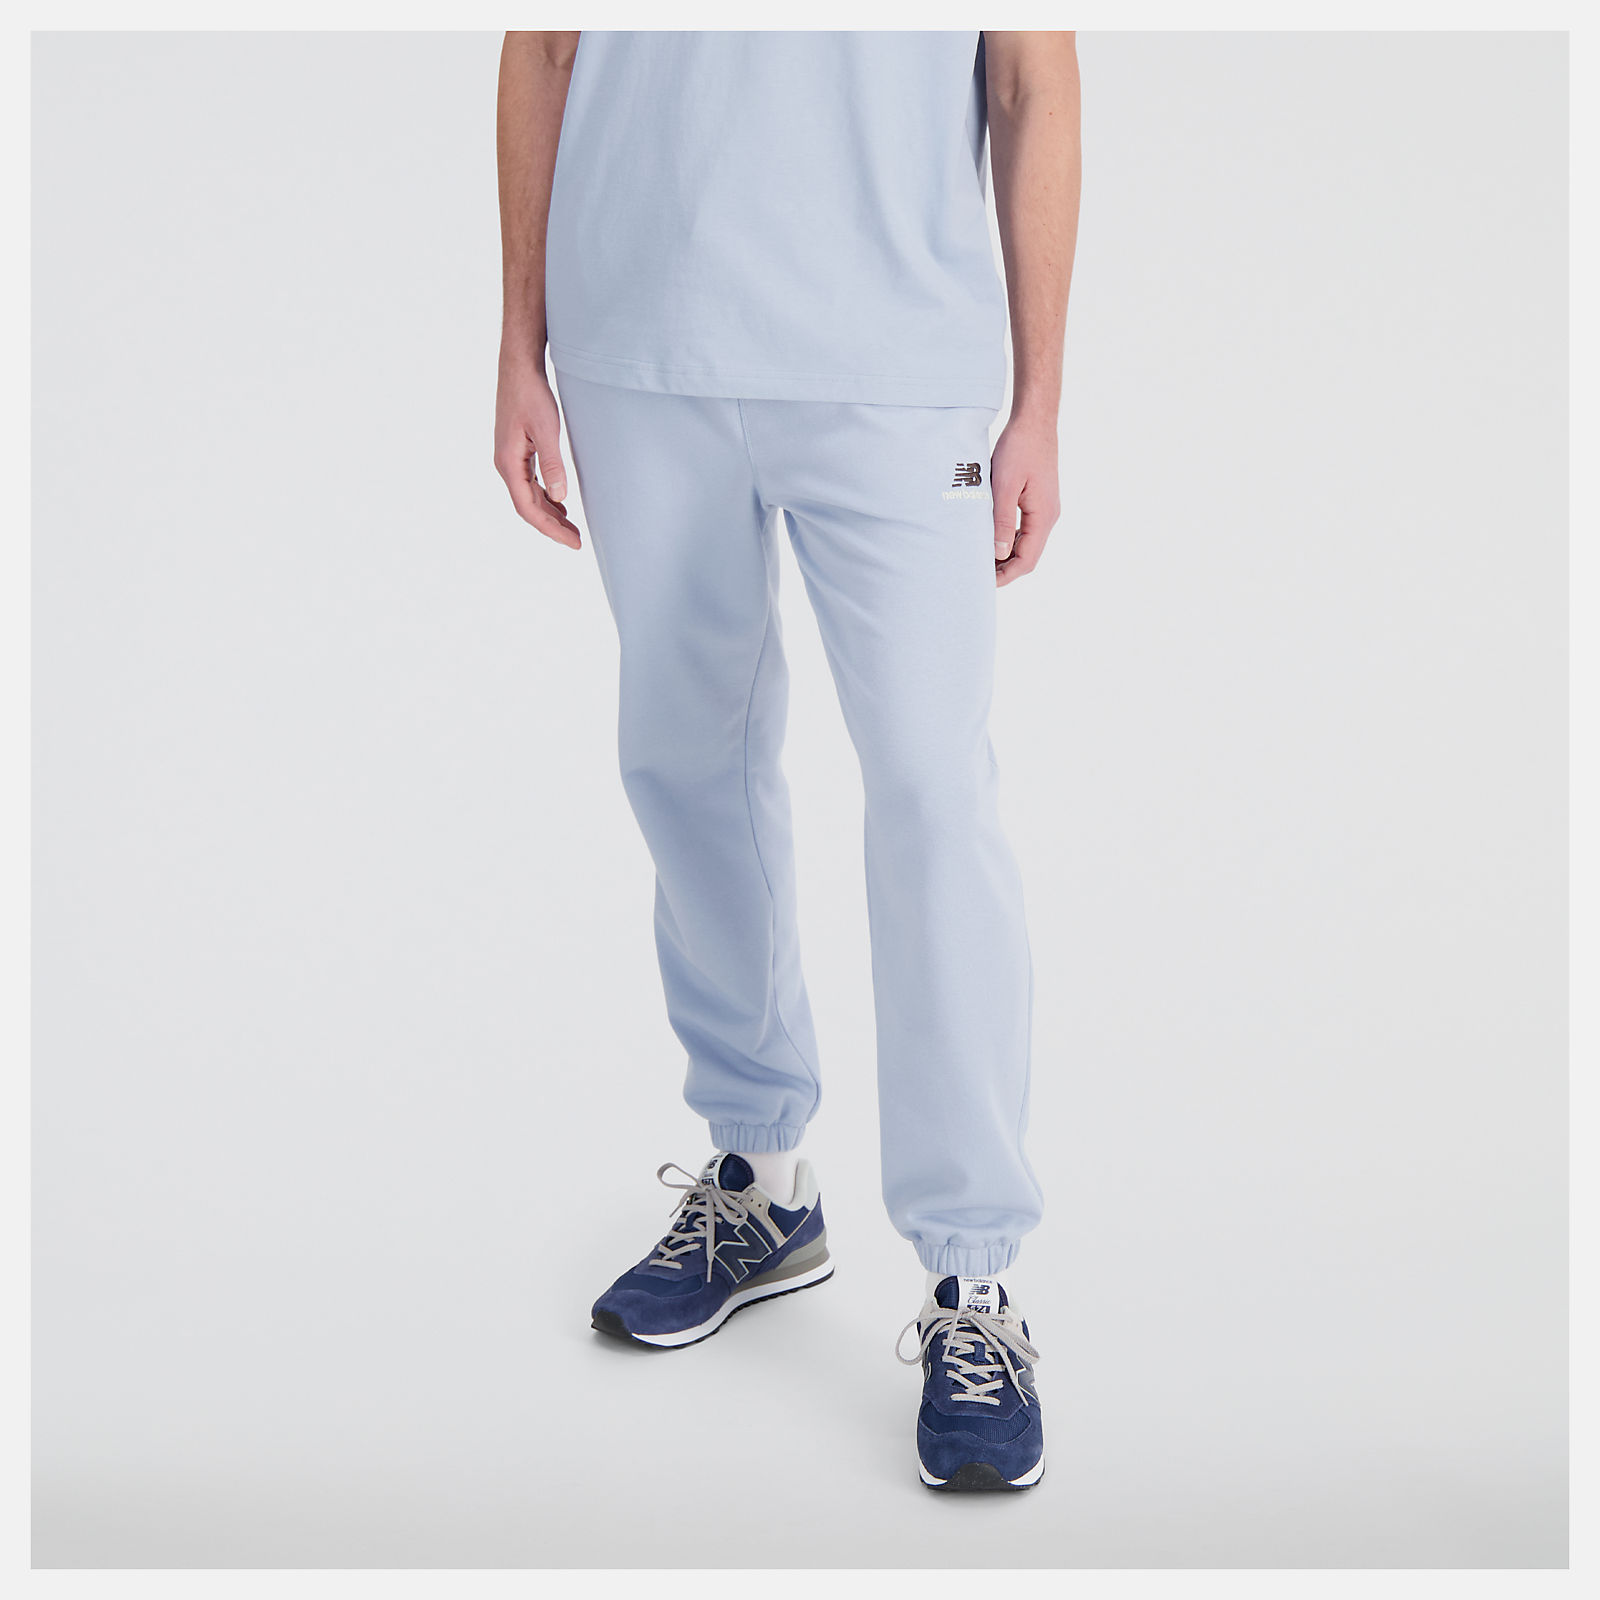 Newbalance Gender Neutral Uni-ssentials French Terry Sweatpant